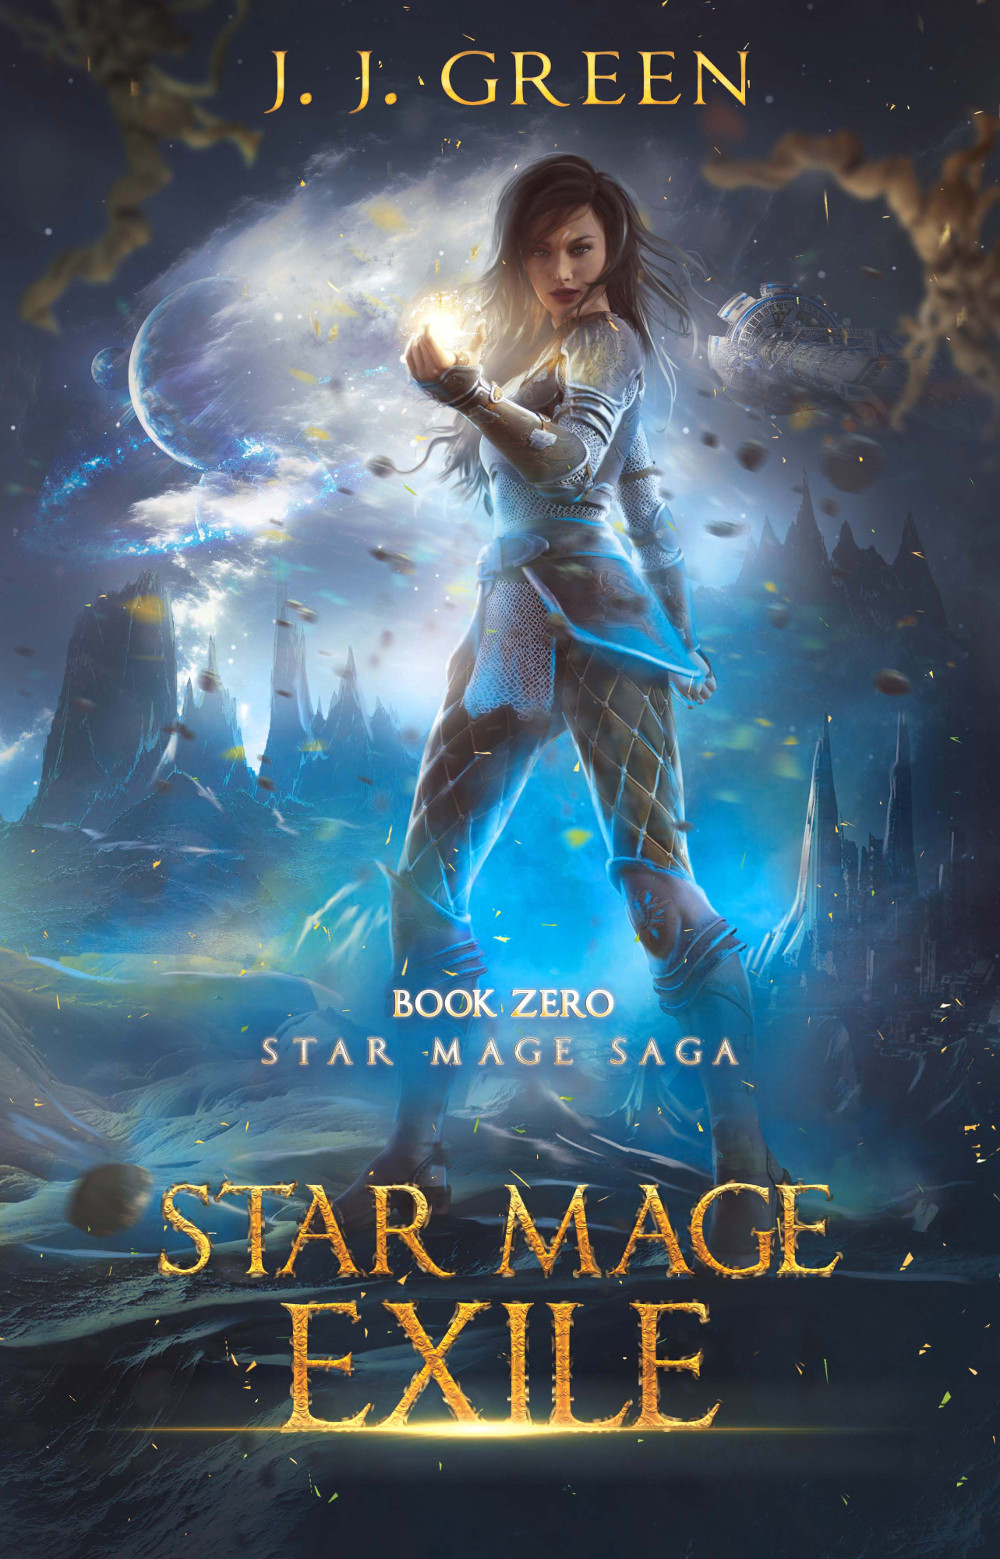 FREE: Star Mage Exile by J.J. Green